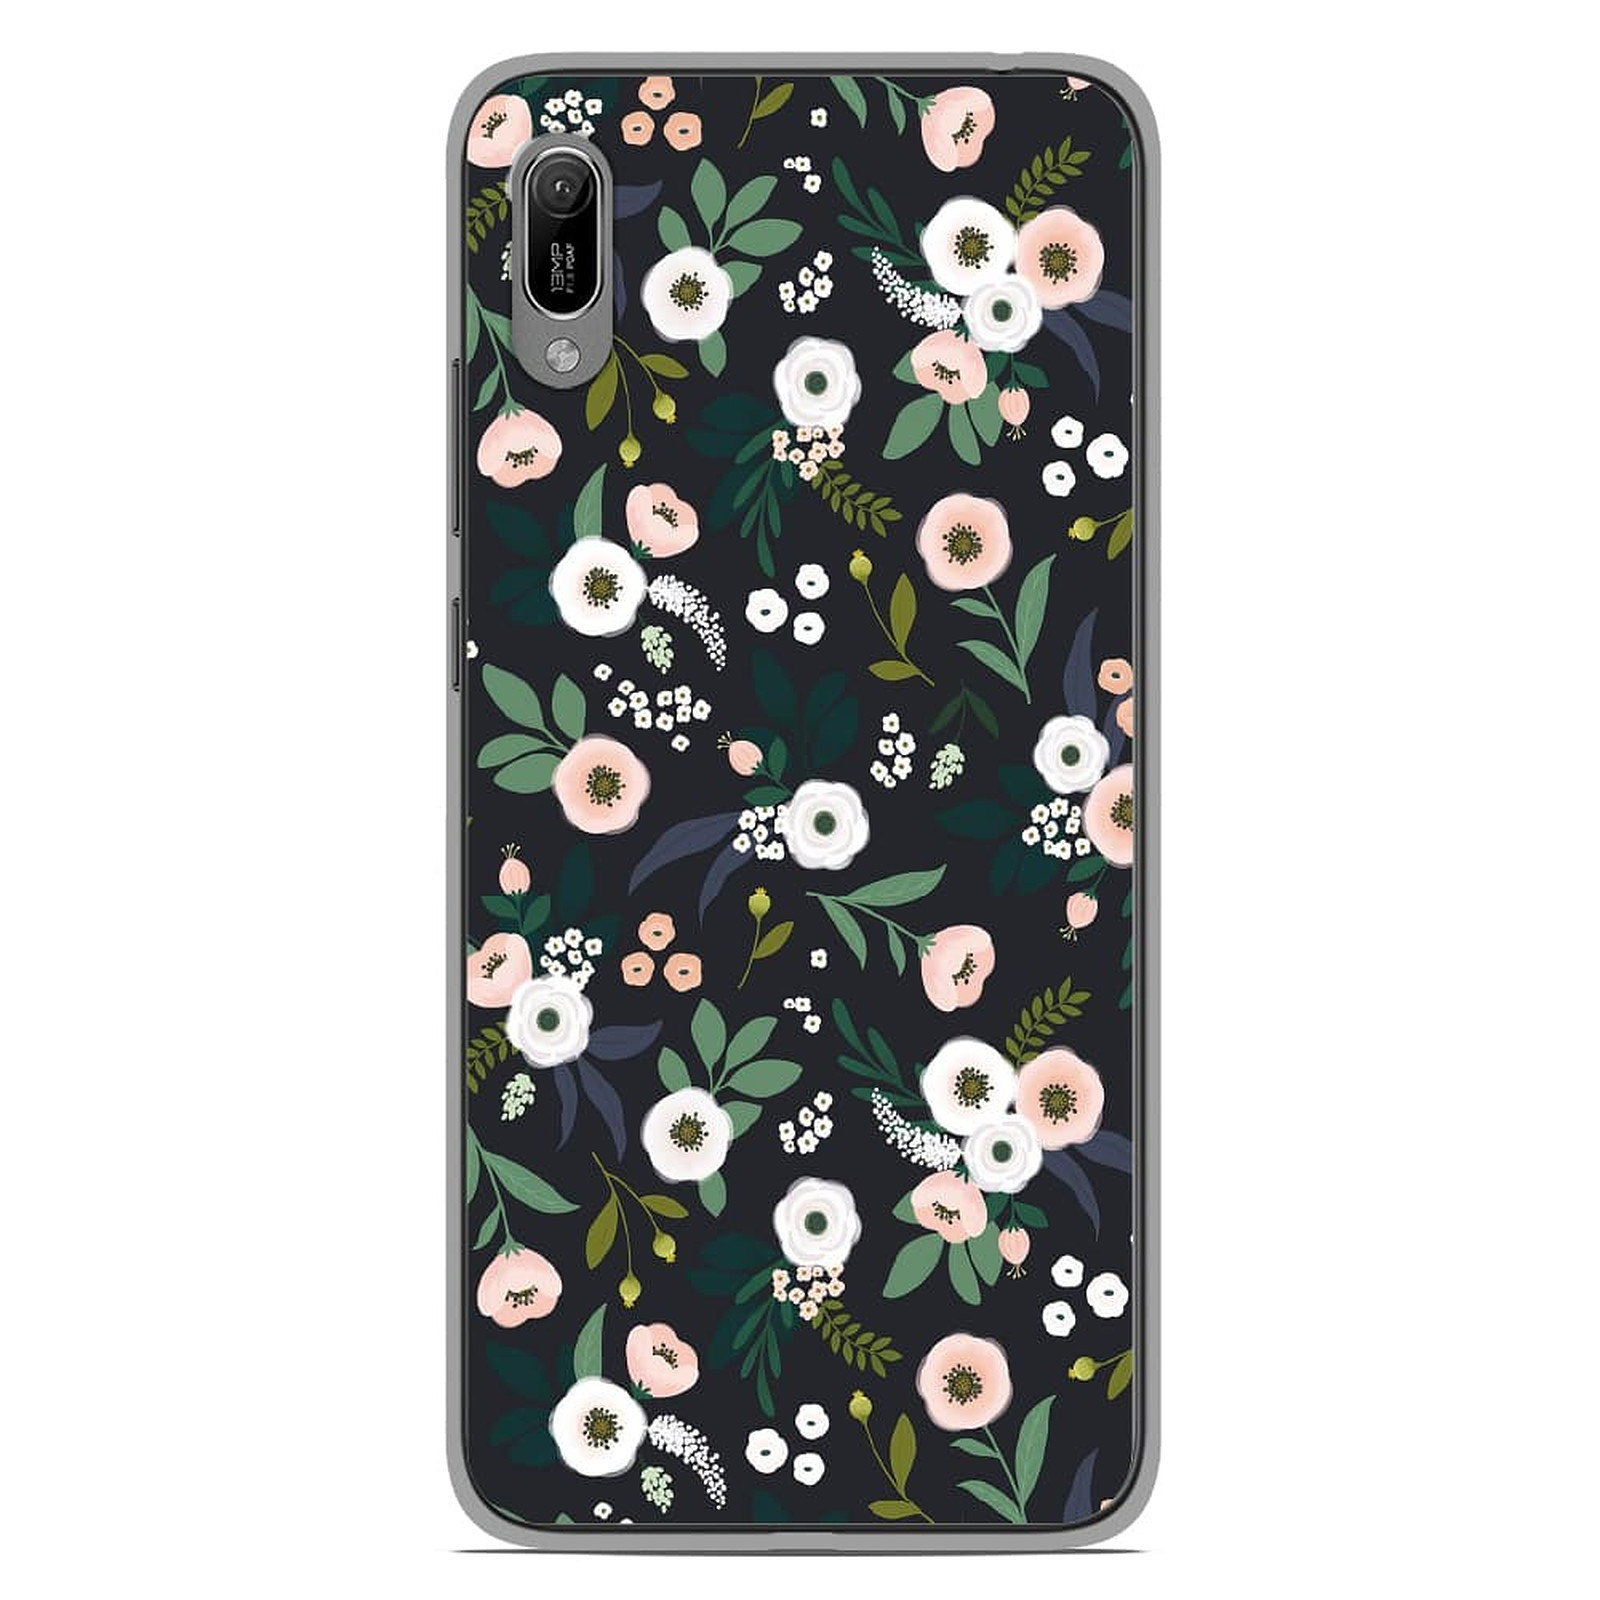 1001 Coques Coque silicone gel Huawei Y6 2019 motif Flowers Noir - Coque telephone 1001Coques